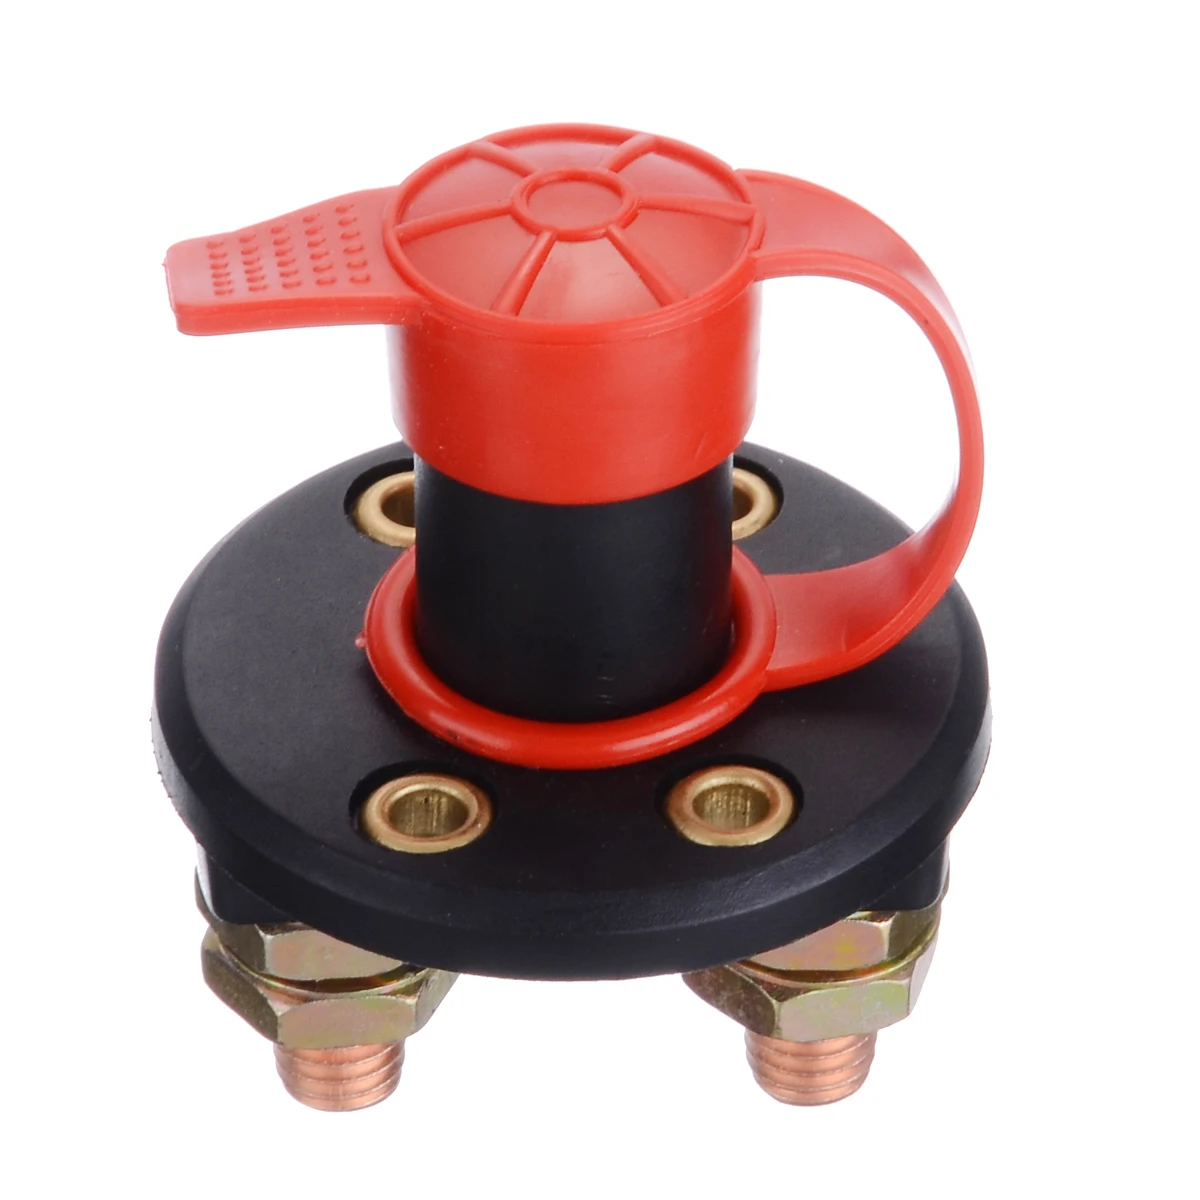 Car Truck Boat Battery Disconnect Switch Power Isolator Cut Off Kill Switch +2 Removable Keys 12V 300A Auto Refitting Switch